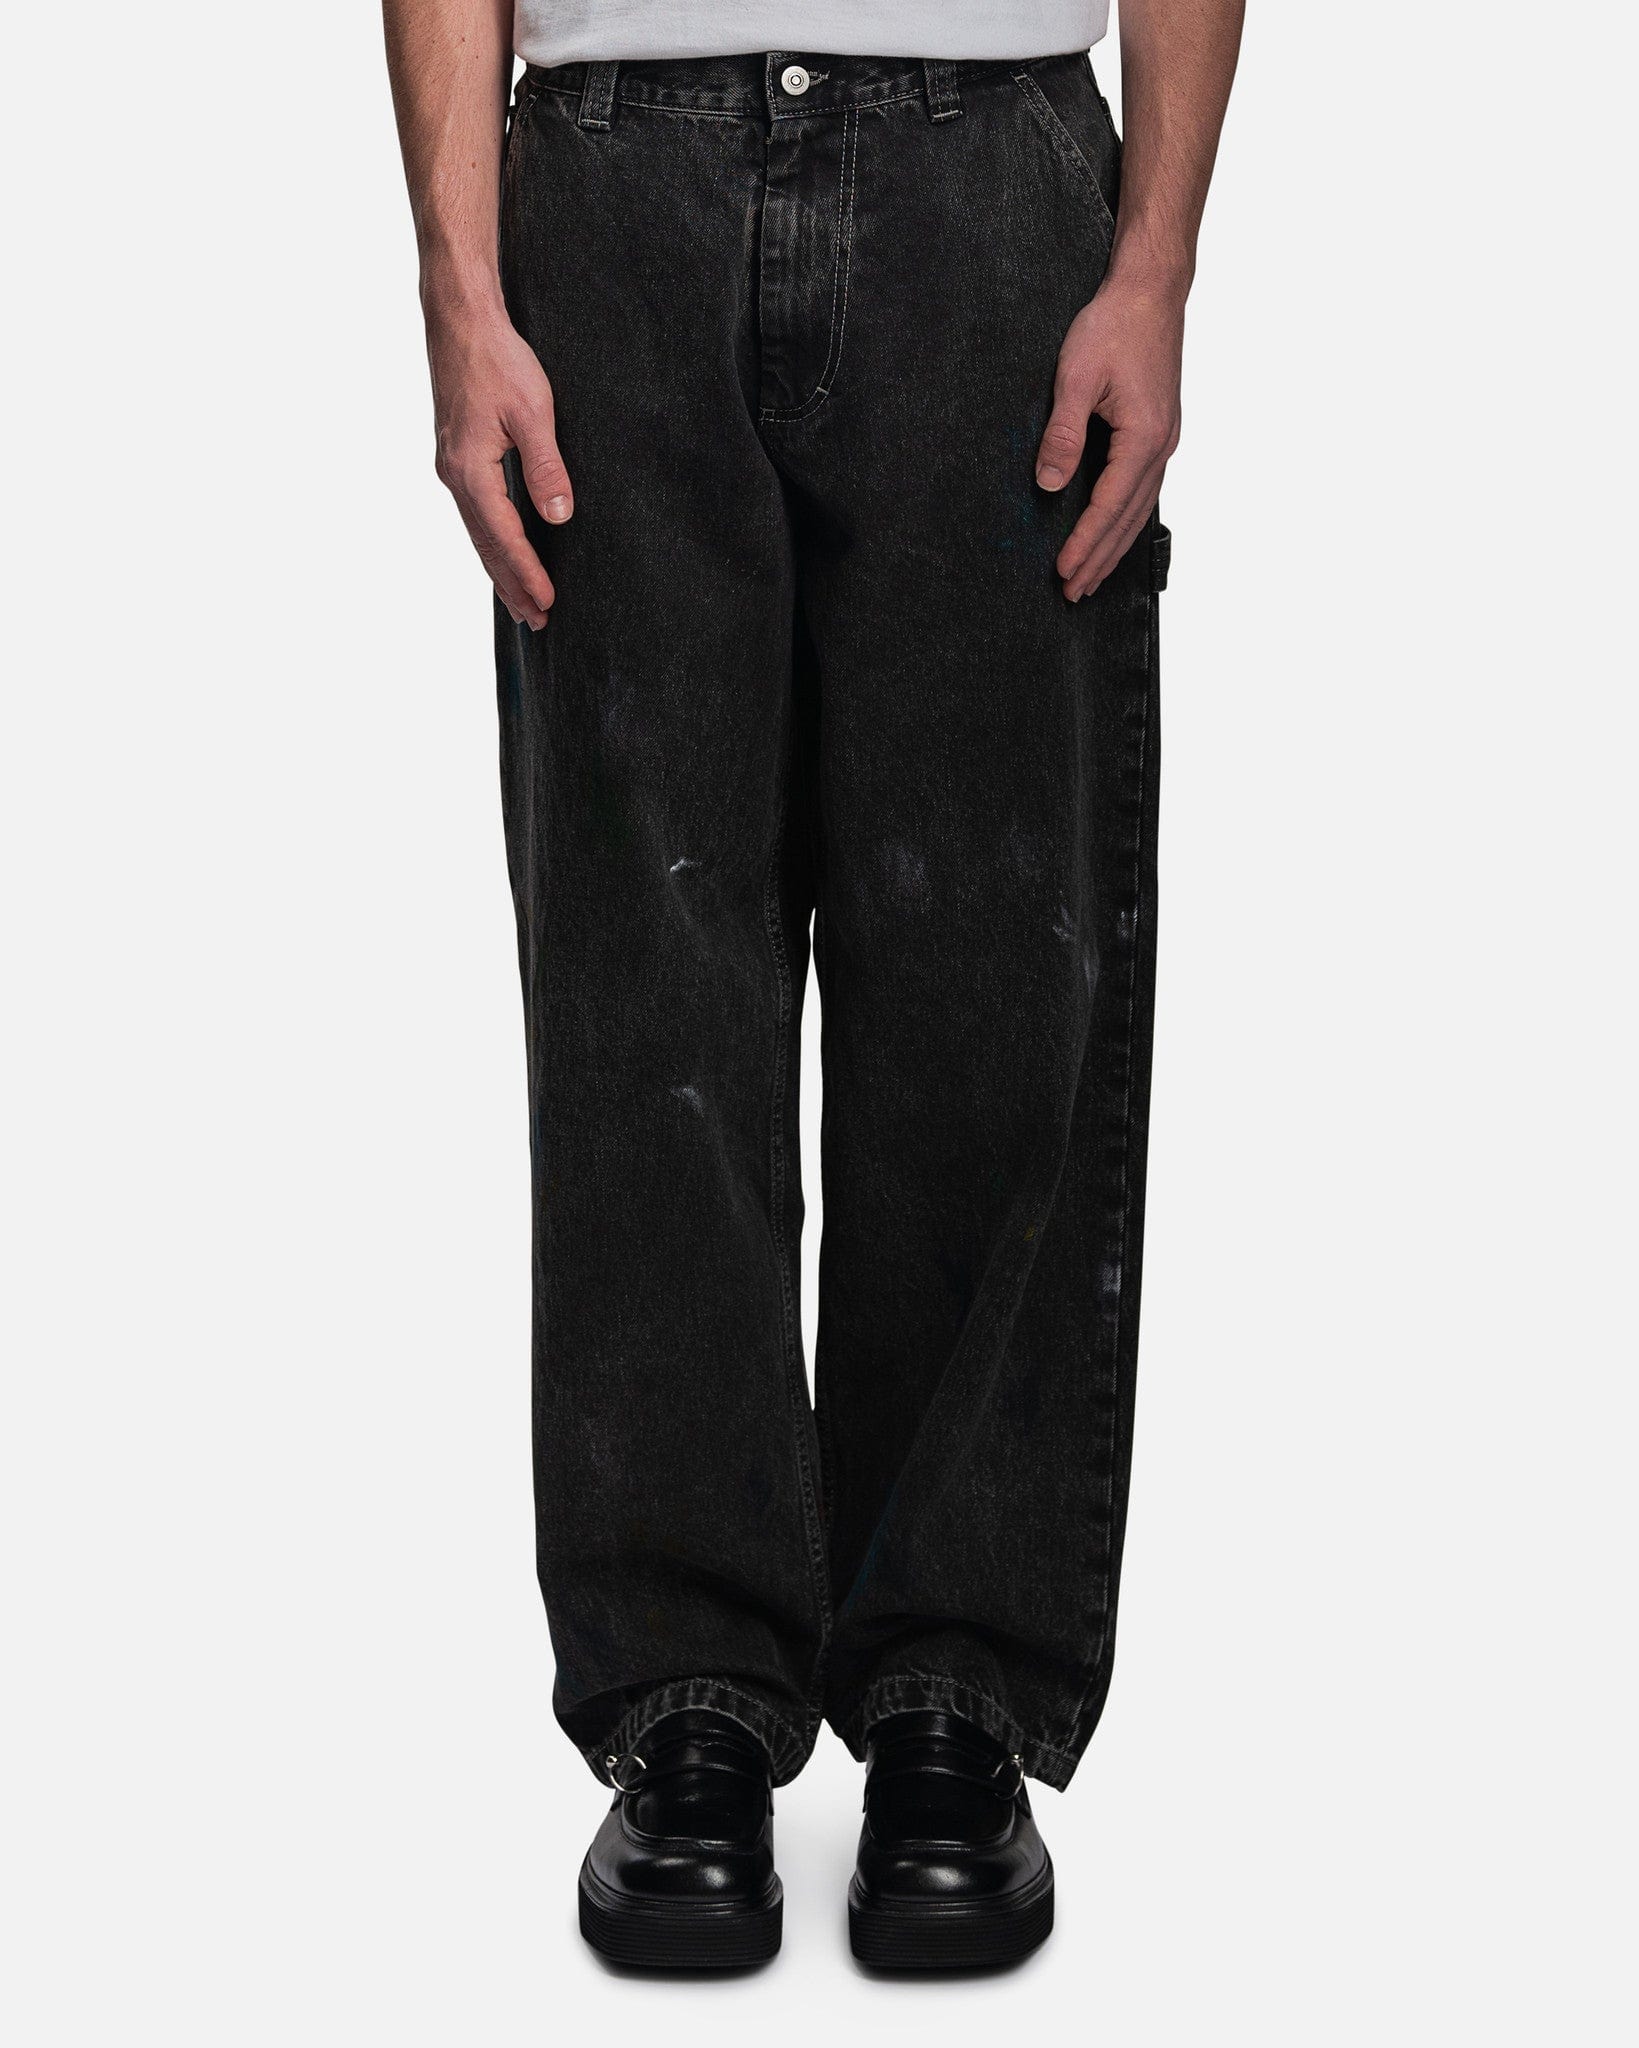 Wide Leg Paint Jeans in Washed Black